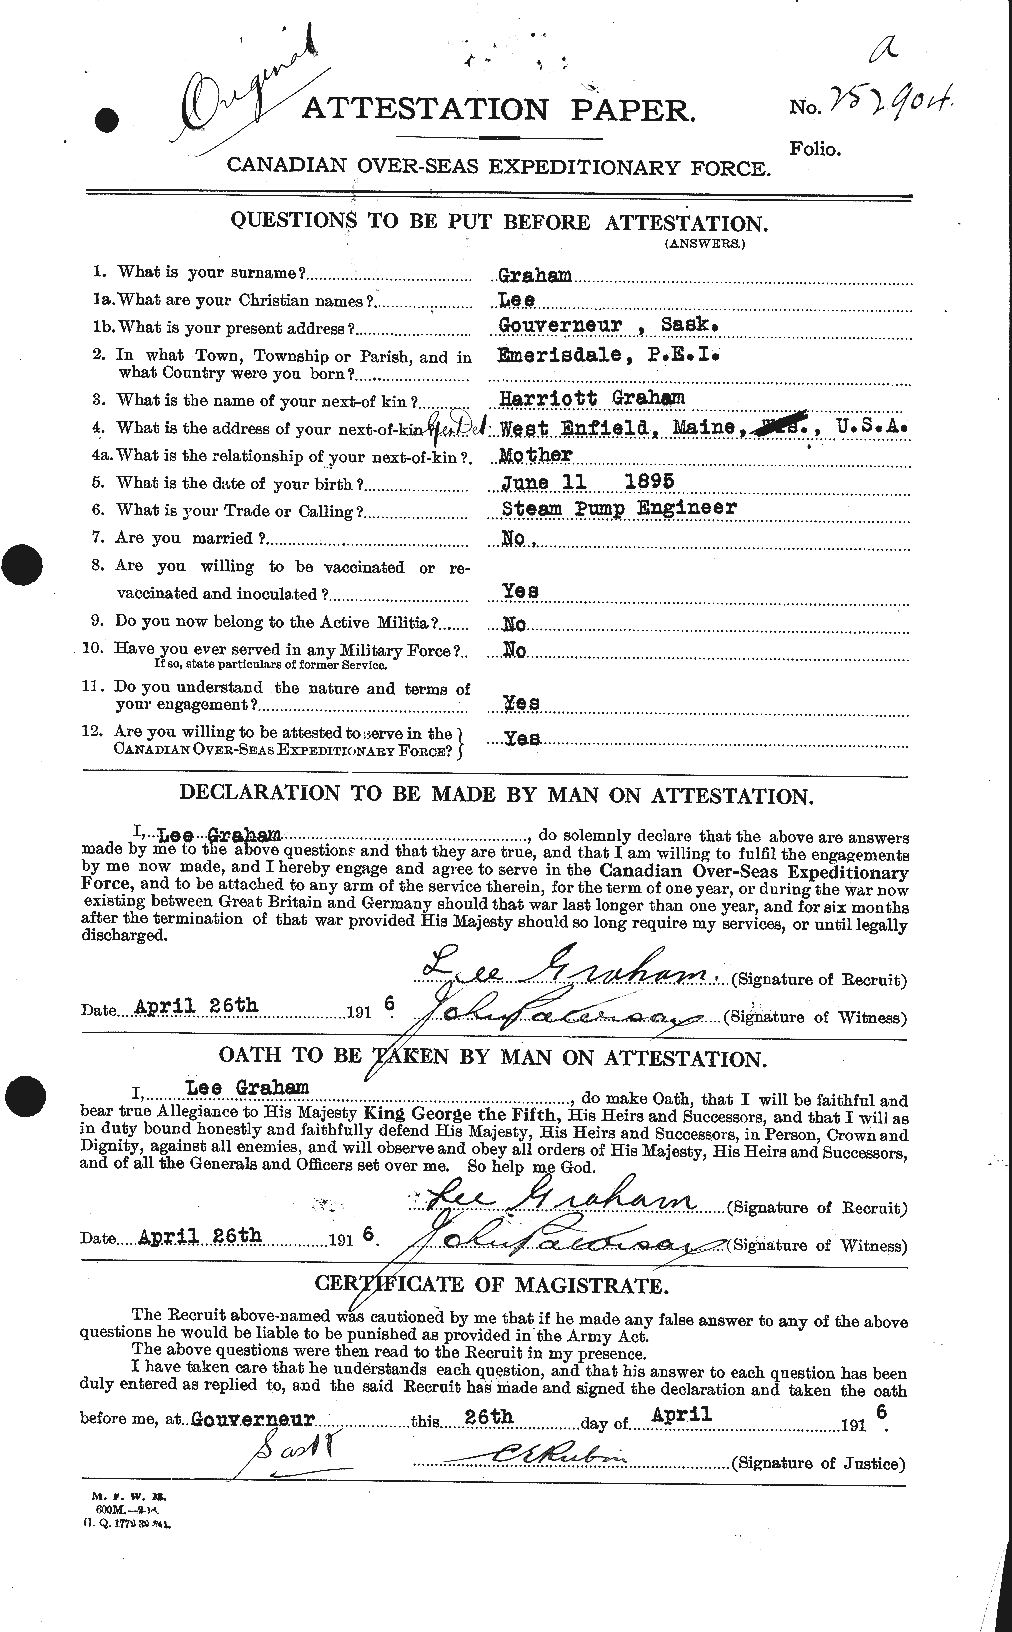 Personnel Records of the First World War - CEF 359262a